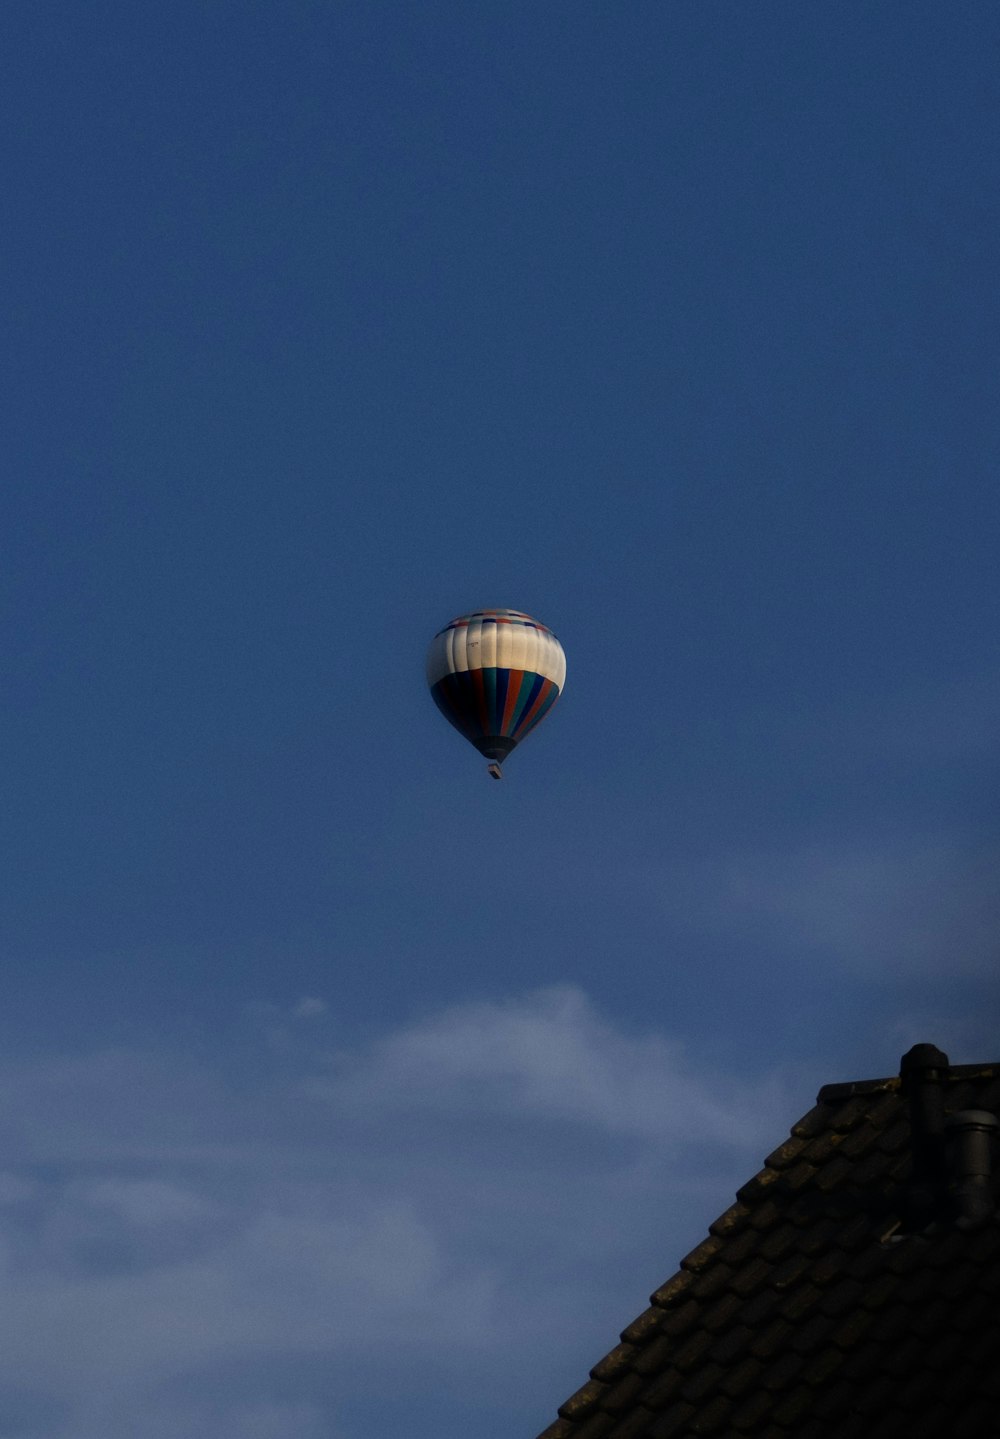 a hot air balloon flying over a house